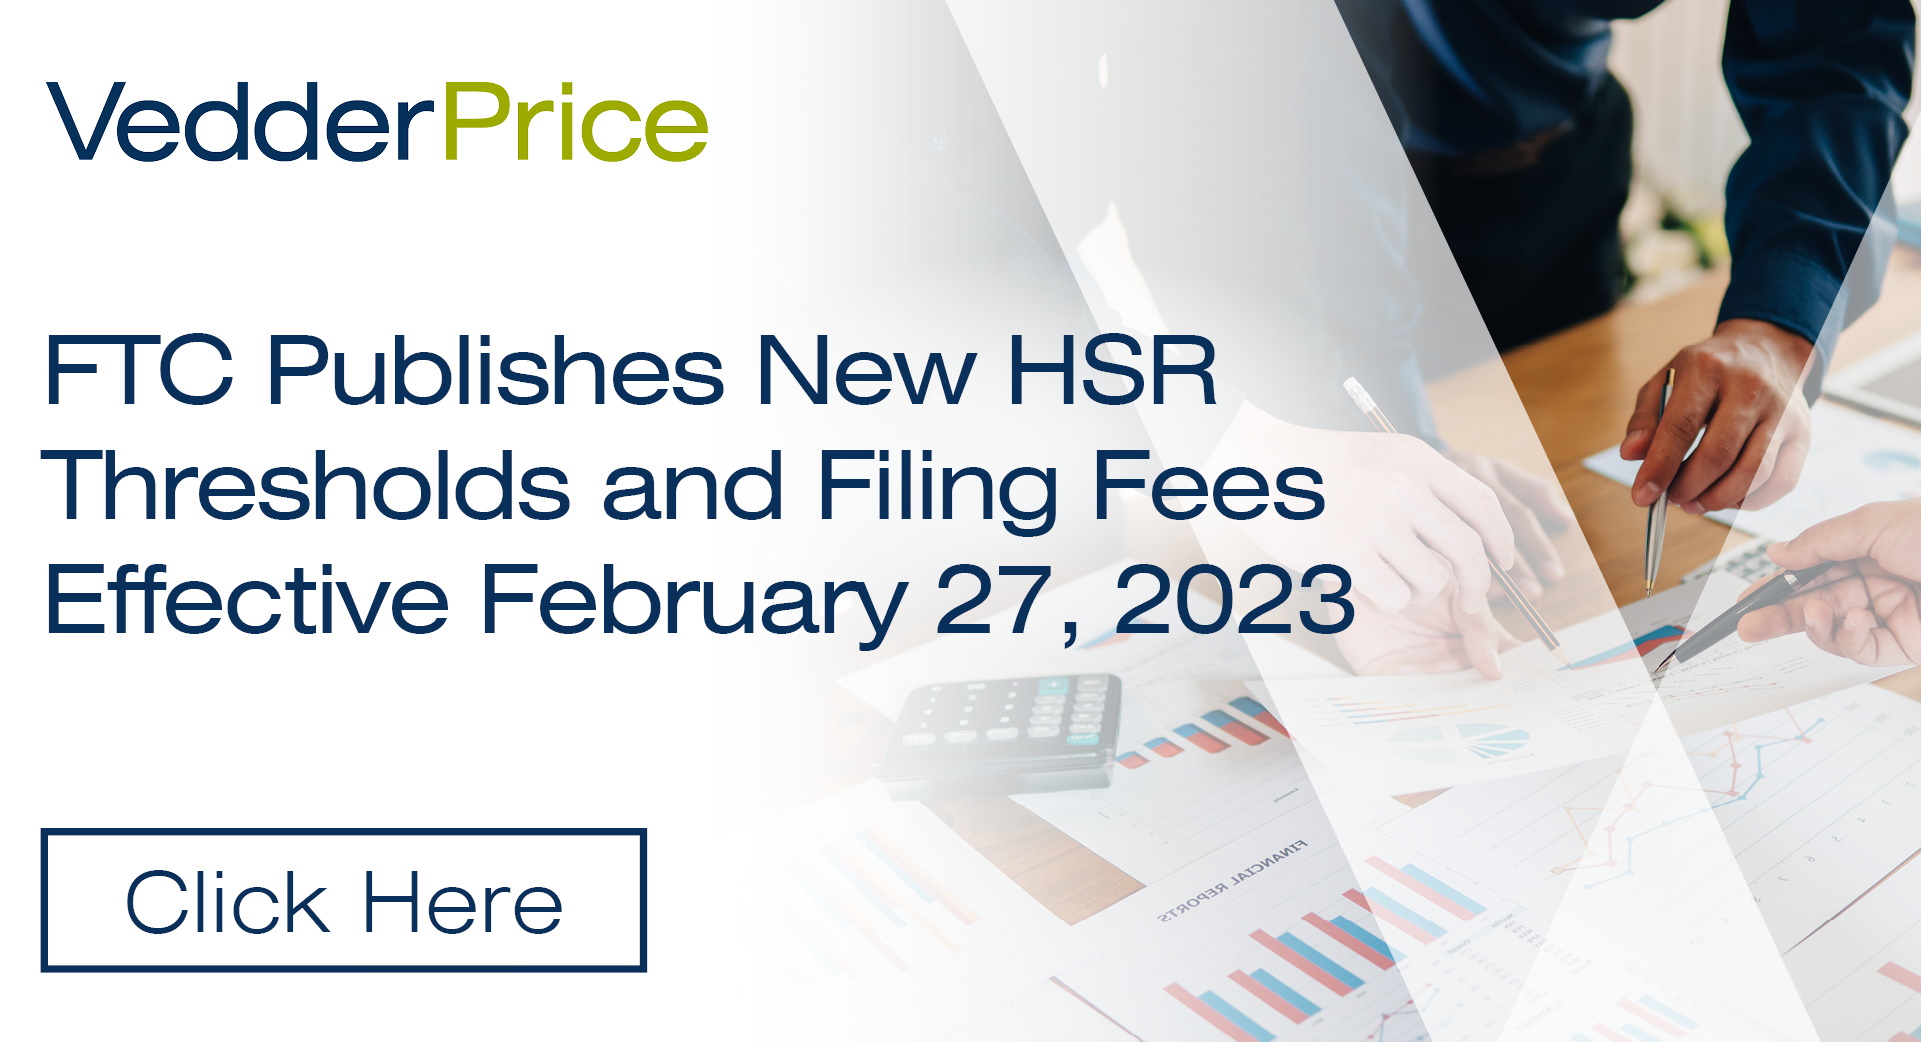 FTC Publishes New HSR Thresholds and Filing Fees Effective February 27